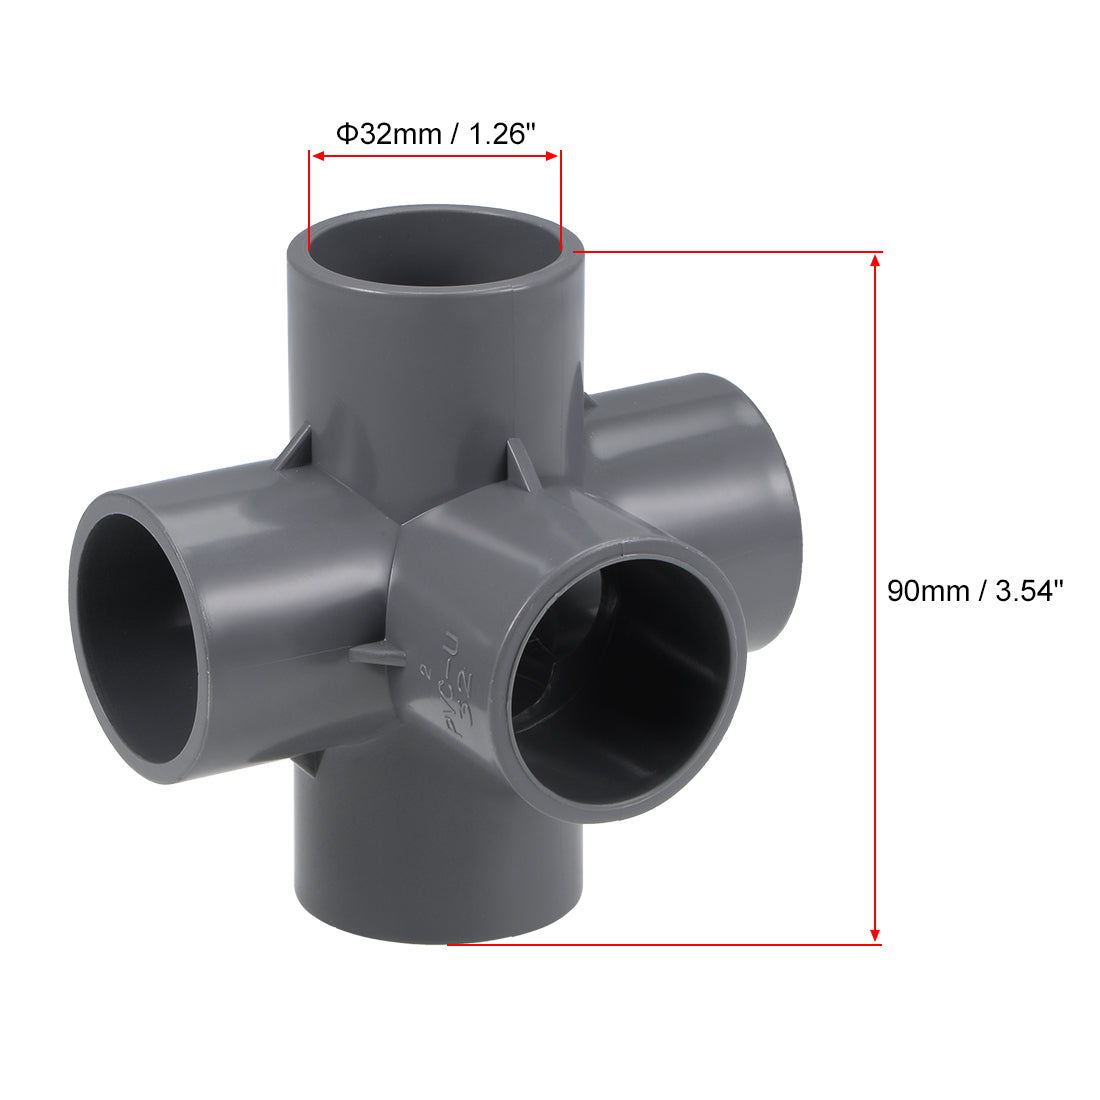 uxcell Uxcell 5 Way 32mm Tee Metric PVC Fitting Elbow - PVC Furniture Elbow Fittings Gray 10Pcs